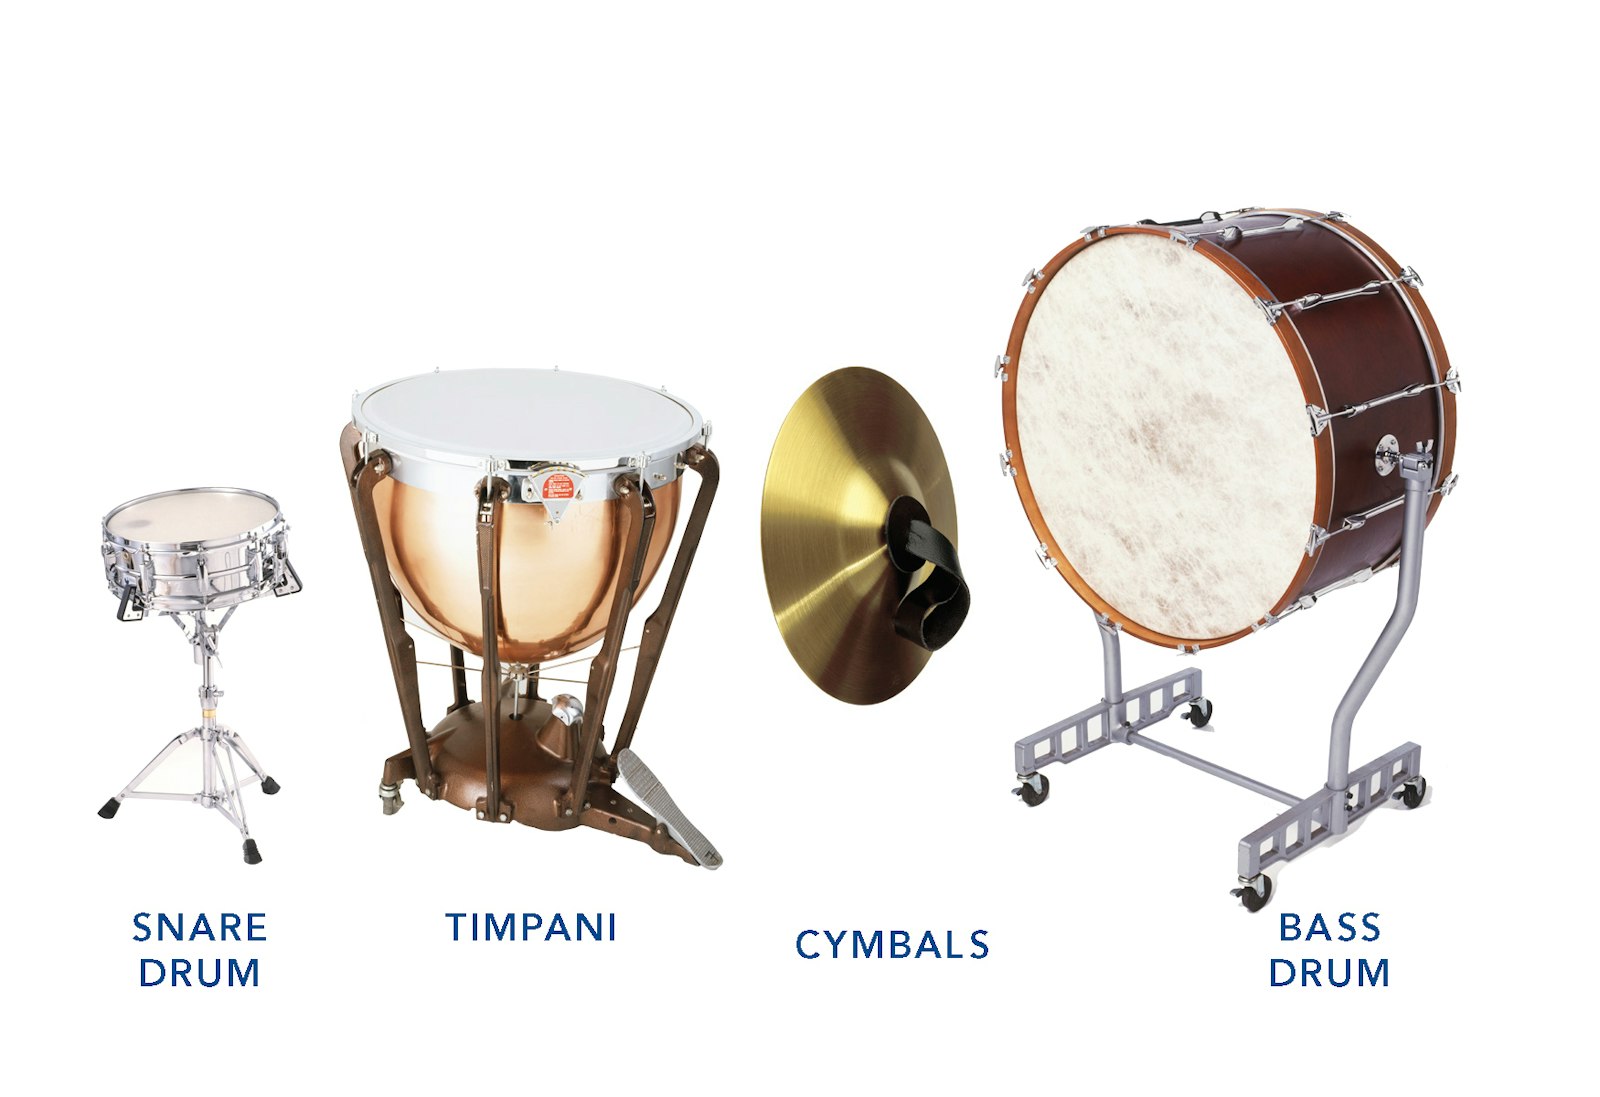 https://sfs.imgix.net/SanFrancisco/media/SanFrancisco/Education%20Instrument%20of%20the%20month/Percussion-Family.jpg?w=1600&h=1600&fit=fill&facepad=4&auto=format